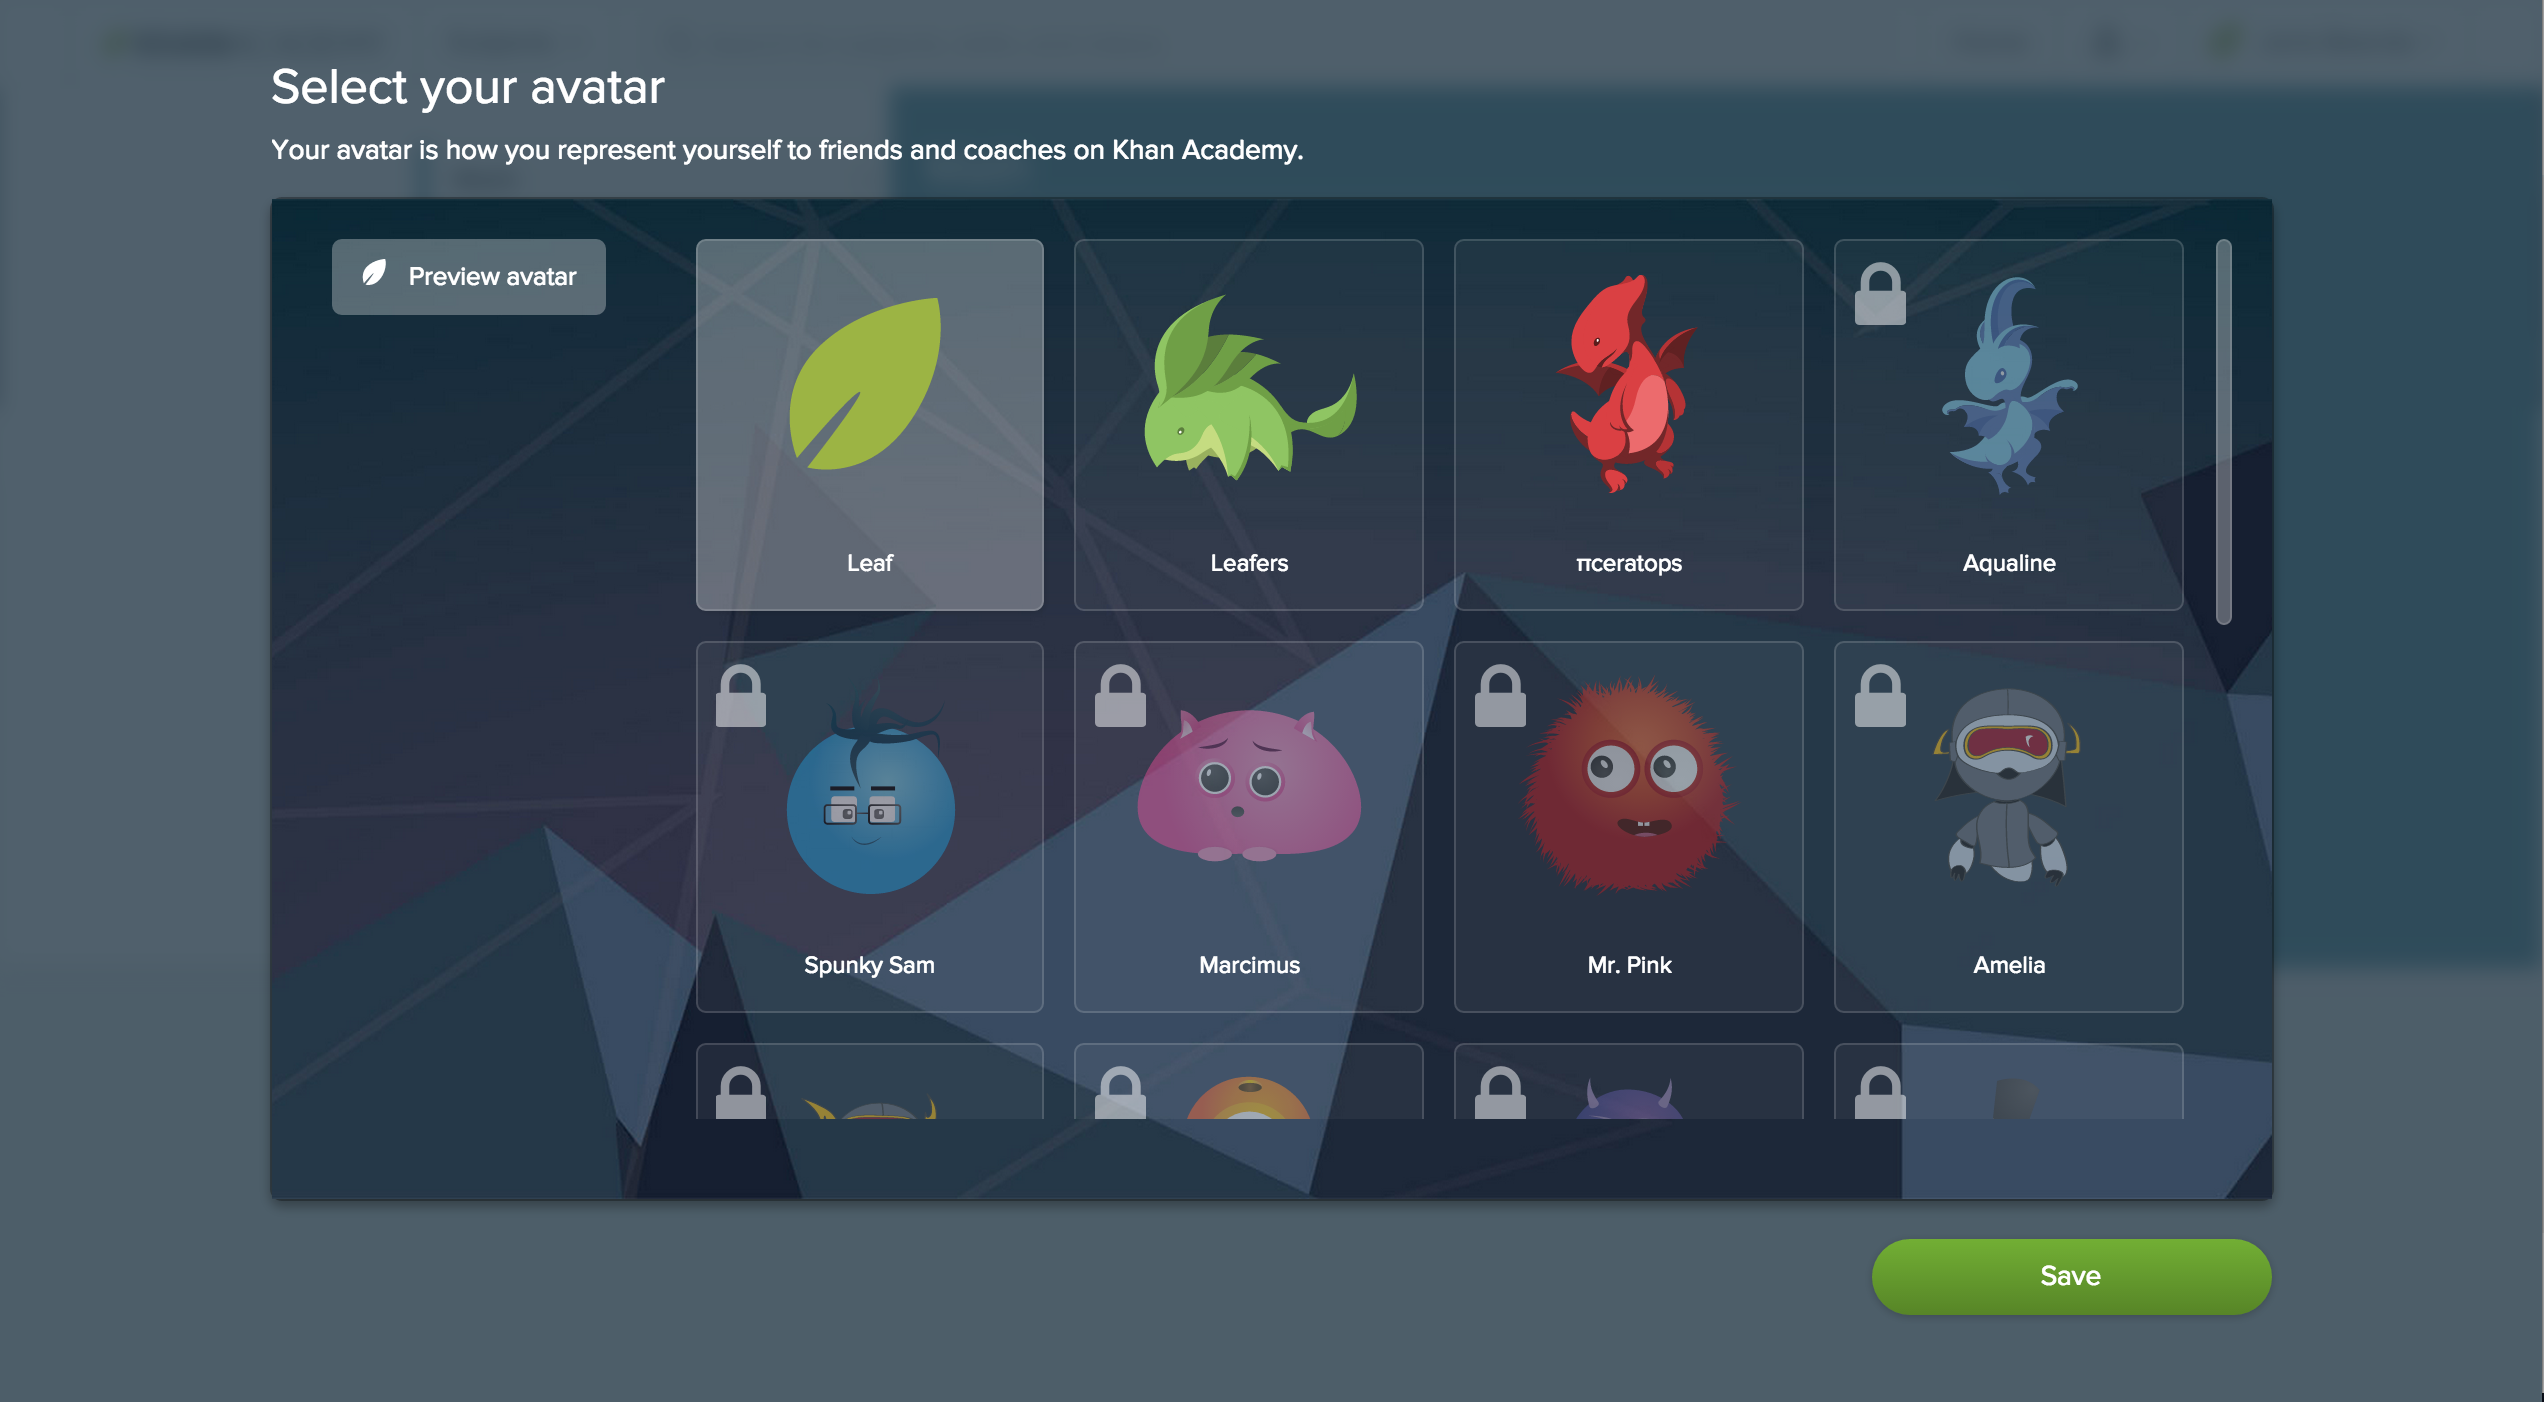 Image showing 8 different avatars users can select in the gamification of Khan Academy